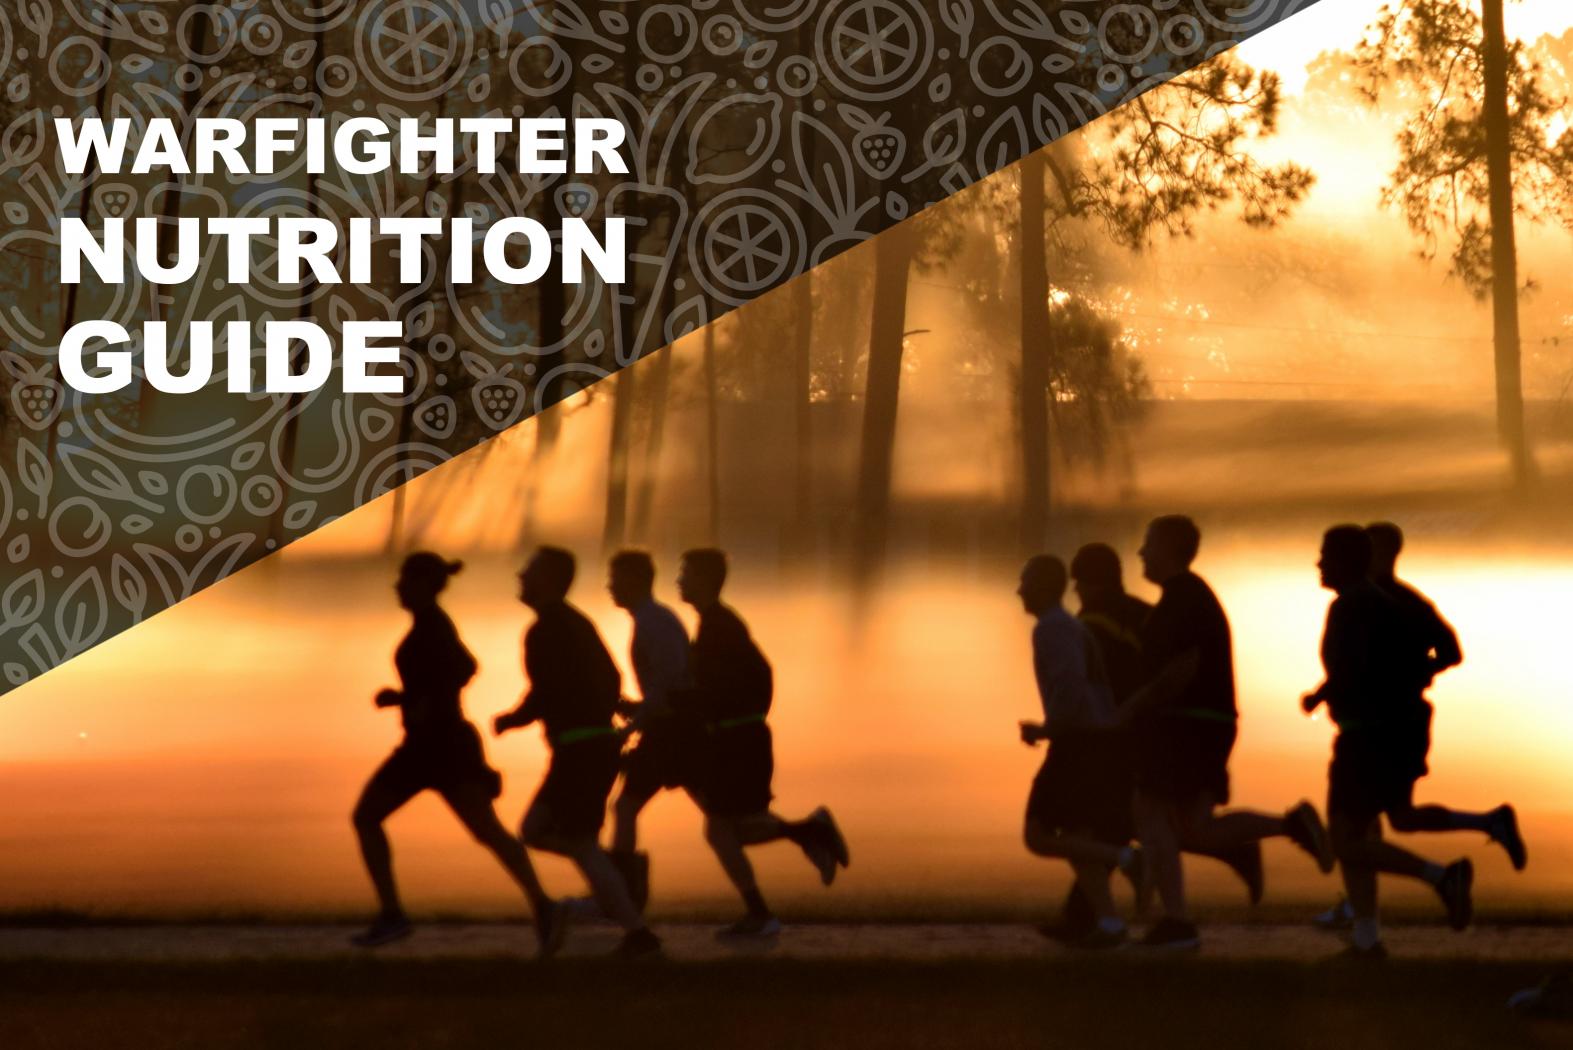 HPRC Warfighter Nutrition Guide. Chapter 7. Silhouette of people running for fitness training at sunrise.